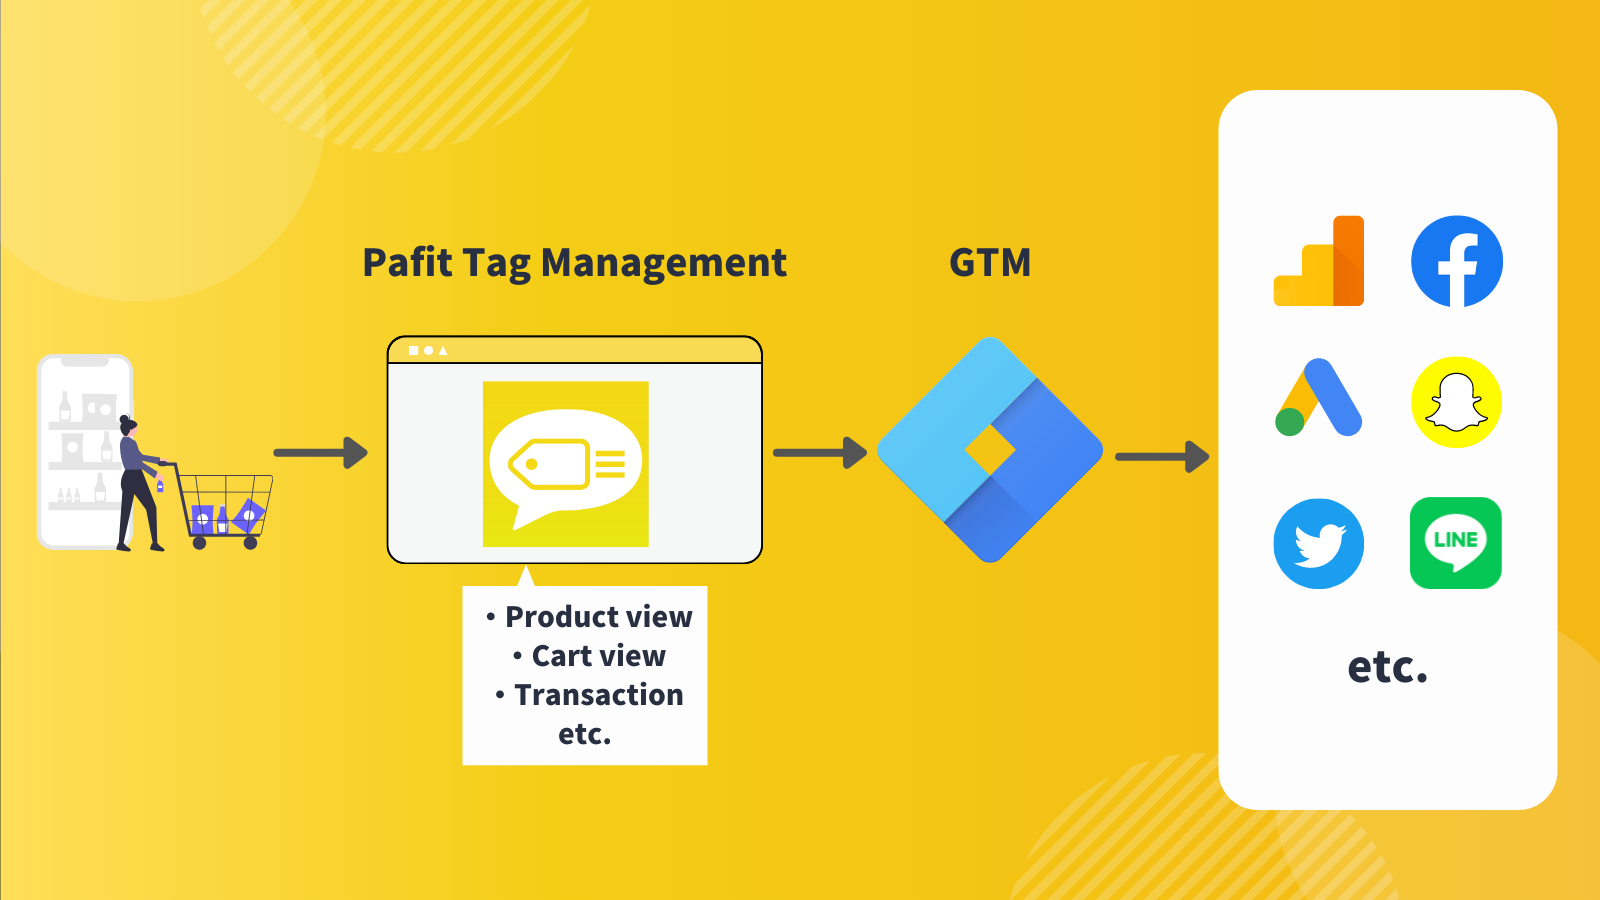 Pafit Tag Management summary